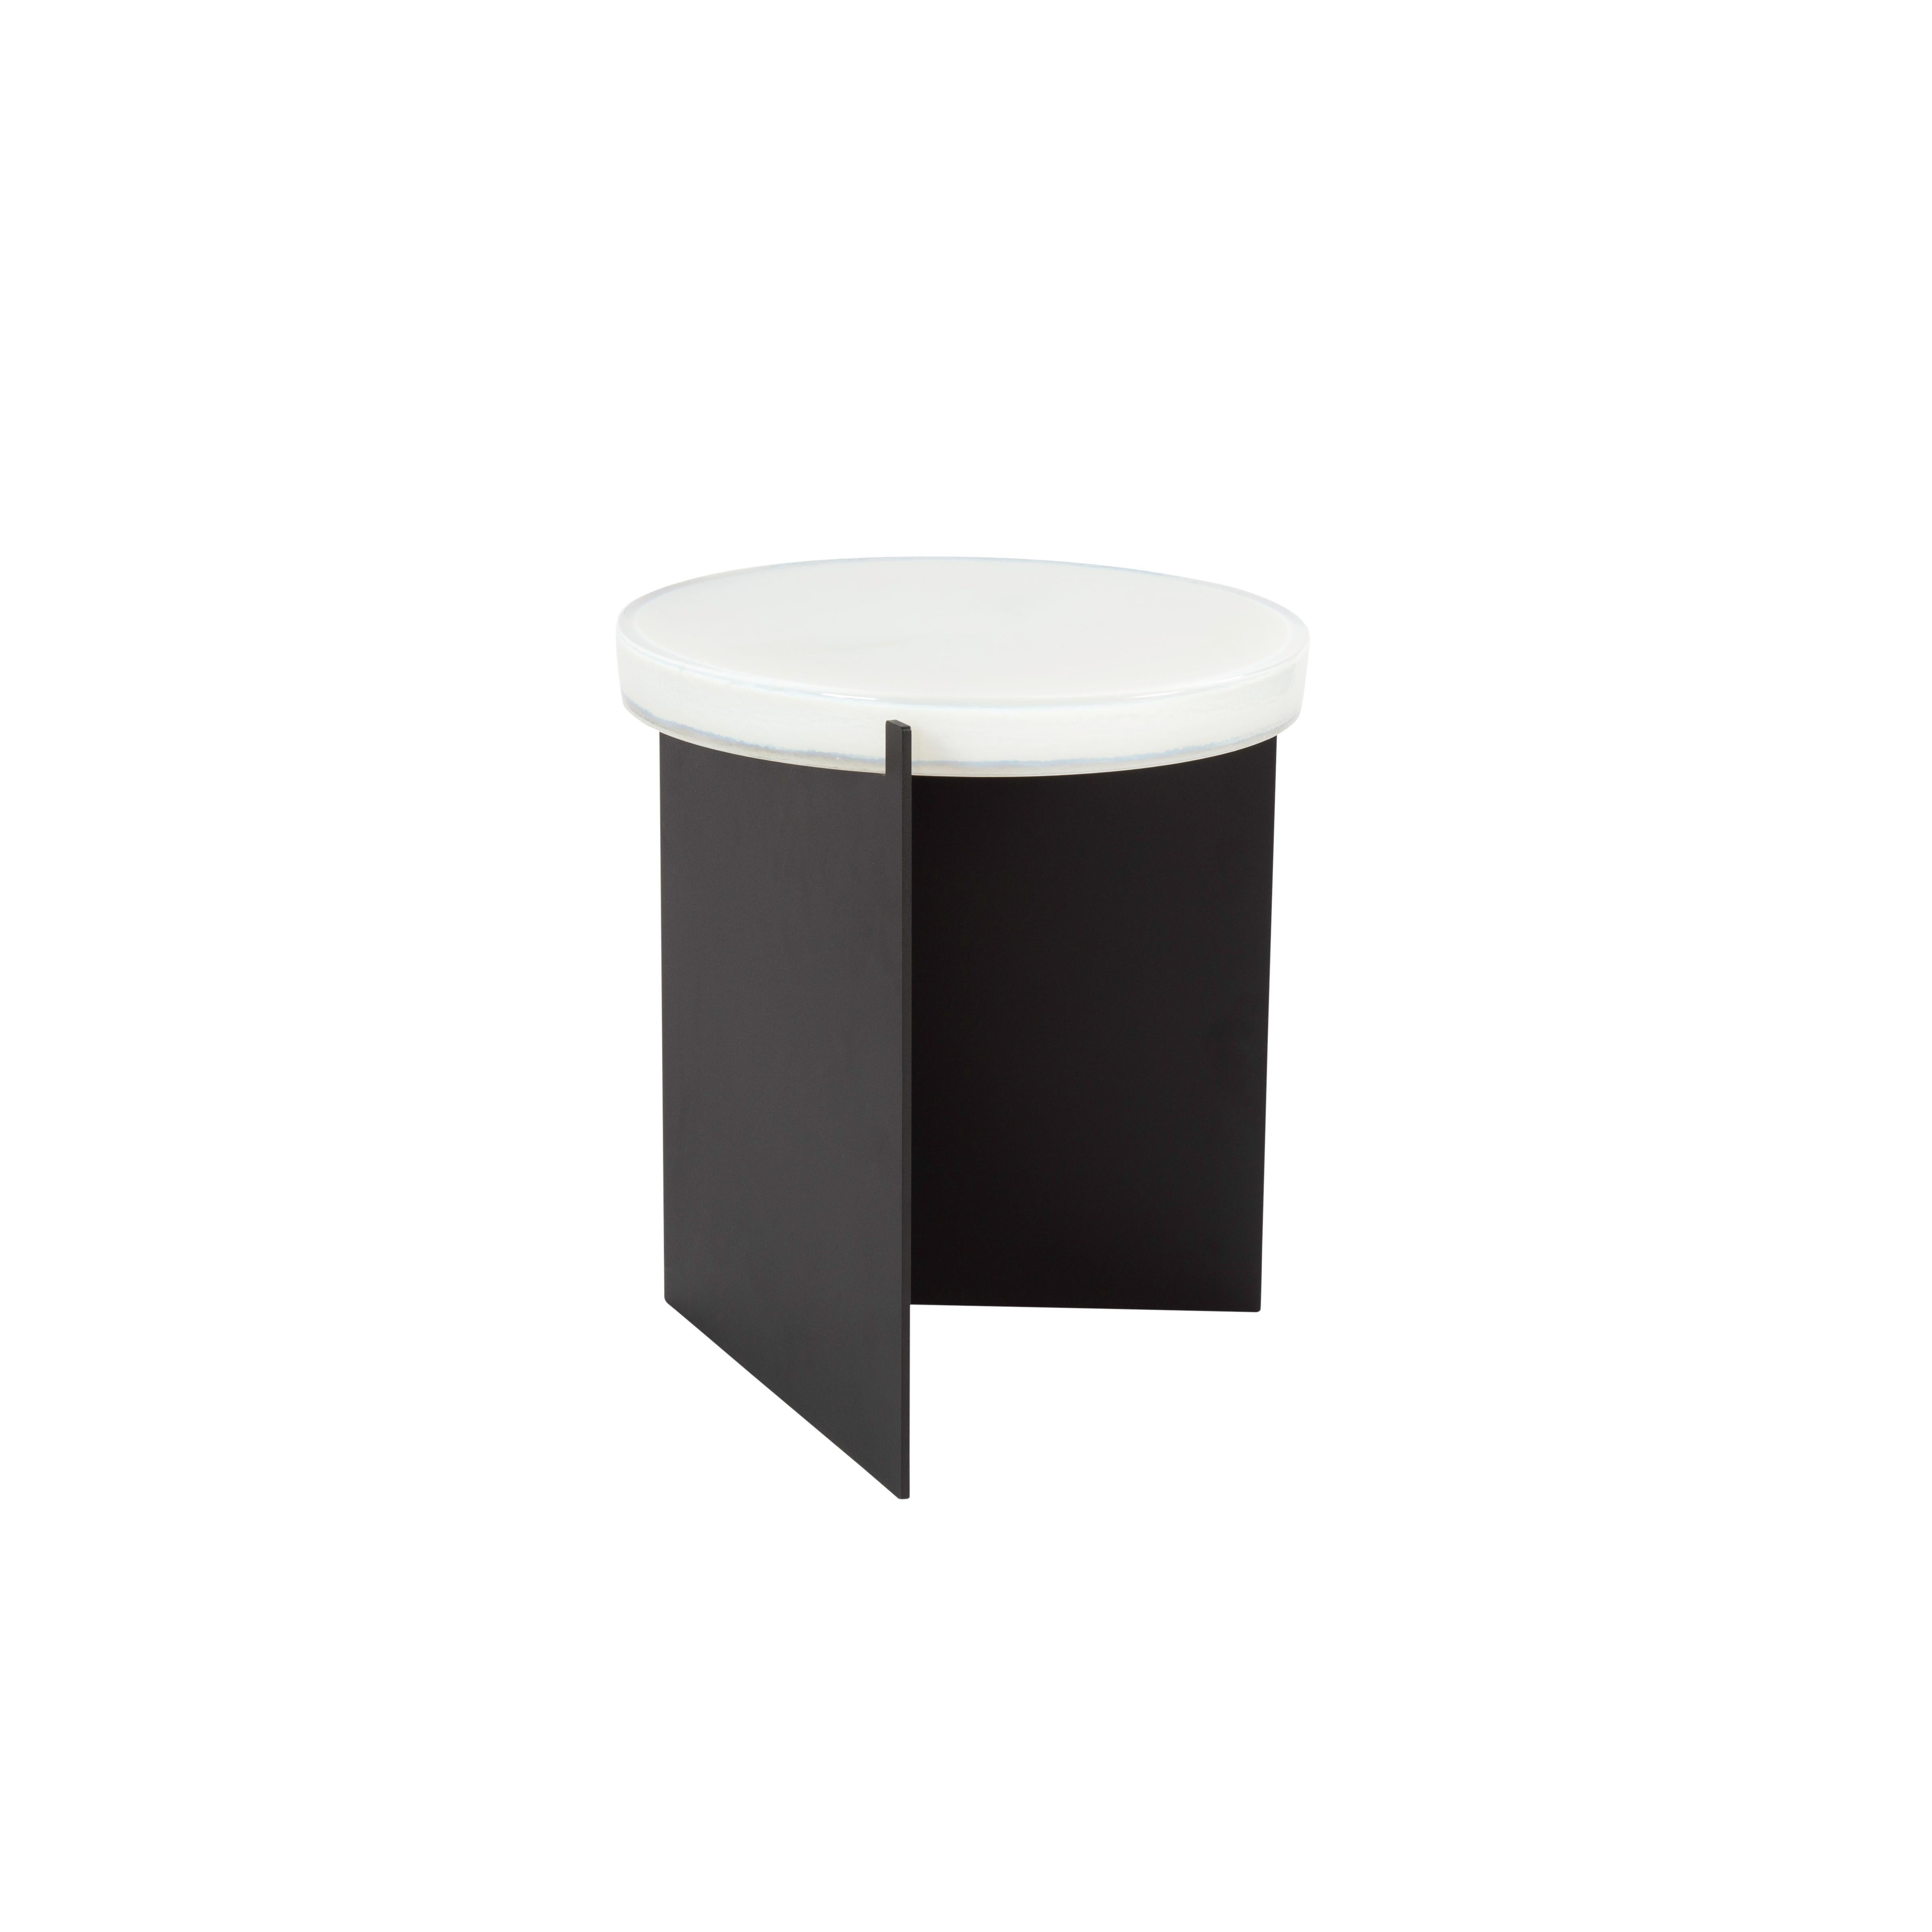 Alwa one white black side table by Pulpo.
Dimensions: D38 x H44 cm.
Materials: Casted glass; powder coated steel. 

Also available in different finishes. 

Normally, glass is regarded as being lightweight with sharp edges. In contrast,